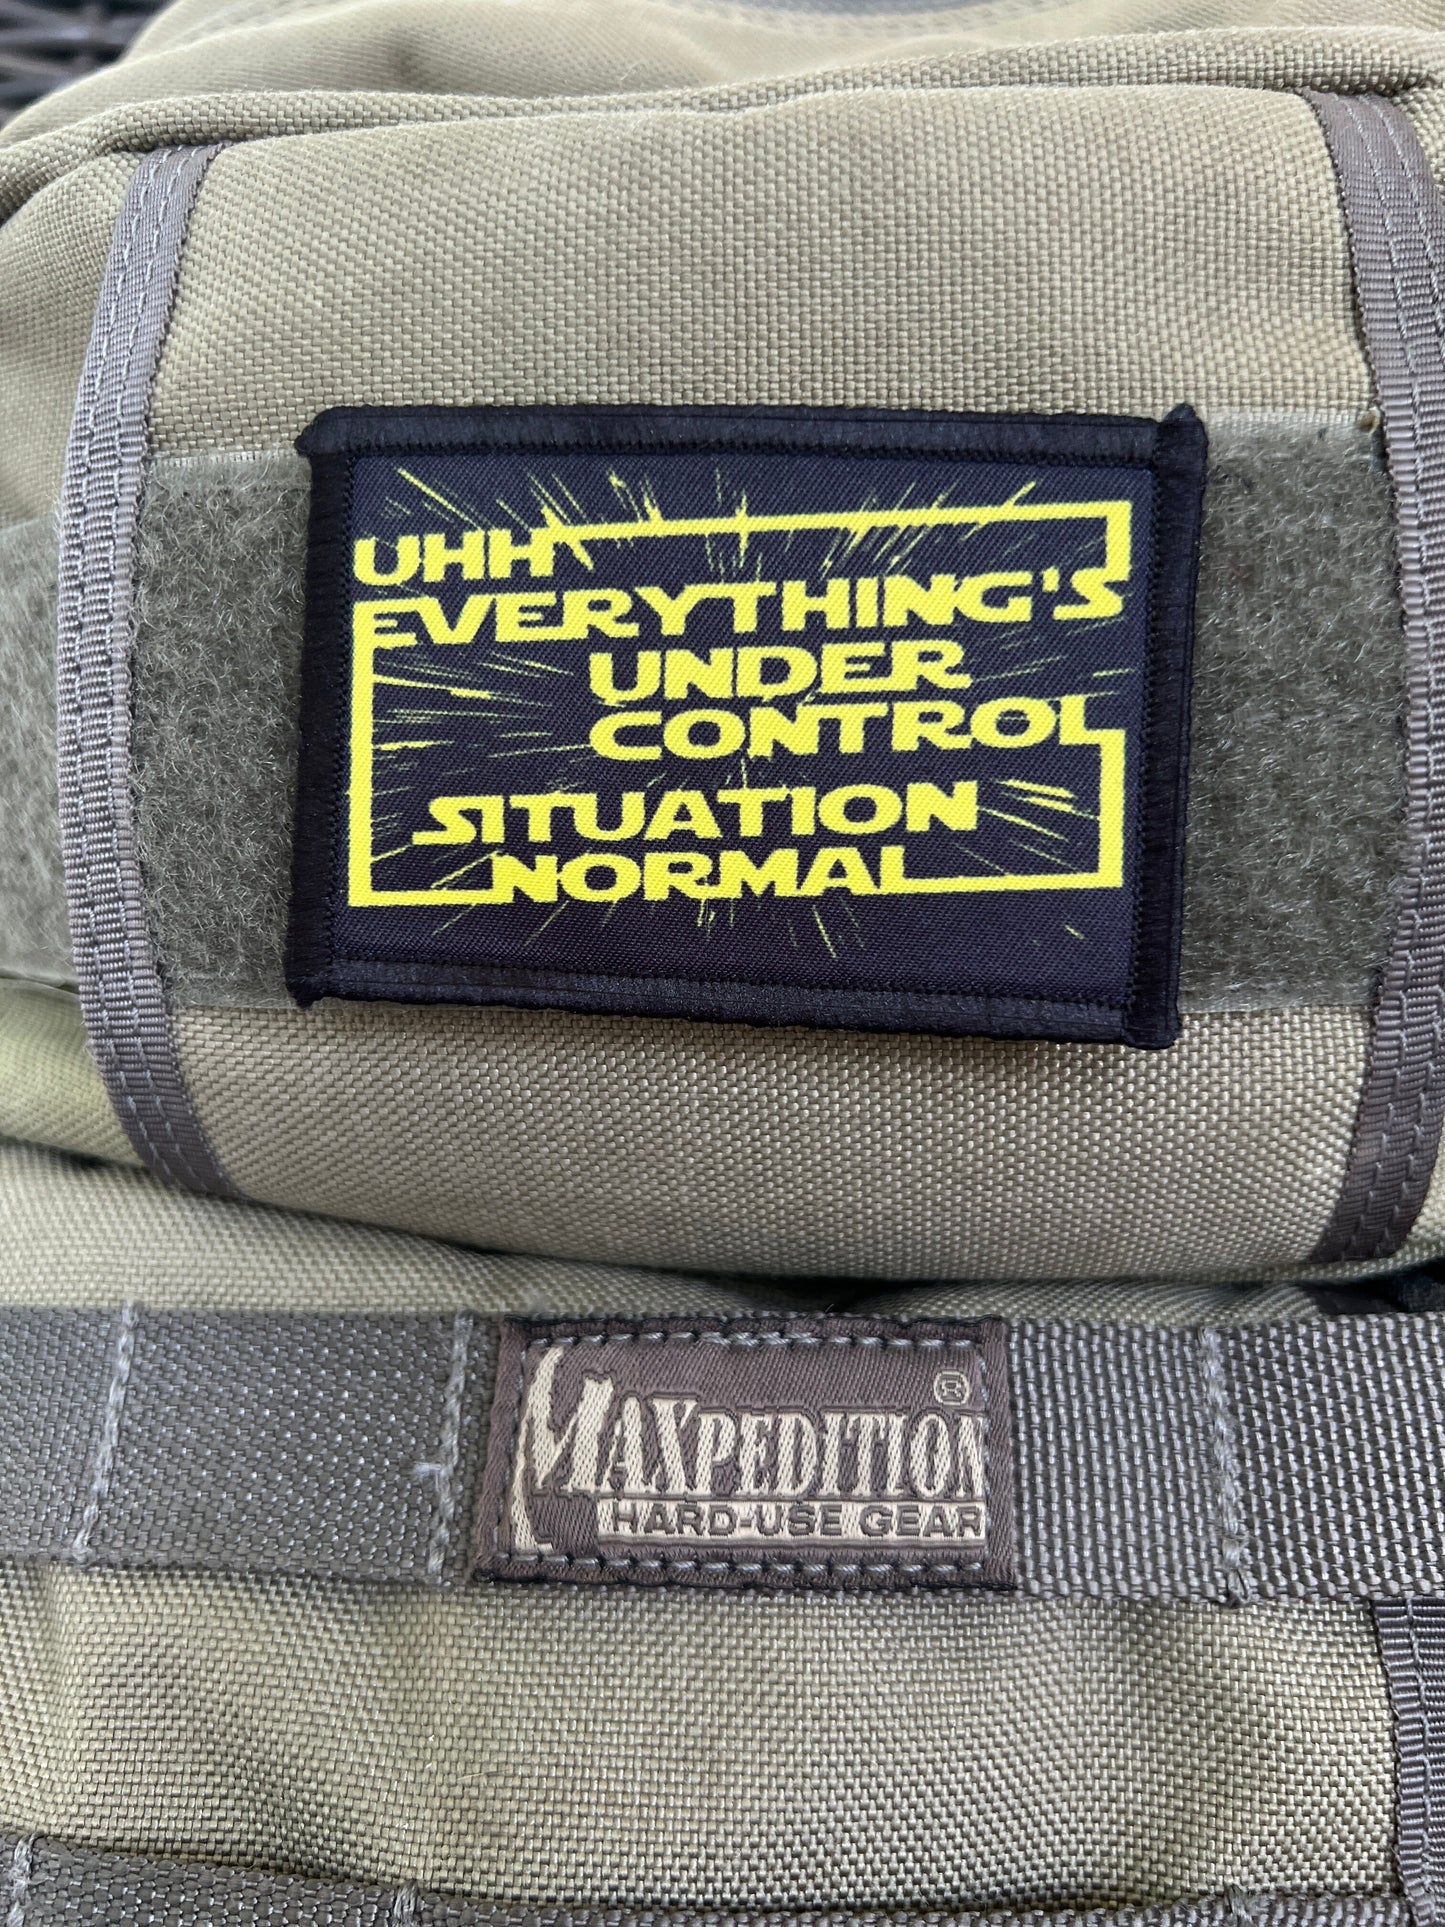 Star Wars Situation Normal Morale Patch Morale Patches Redheaded T Shirts 